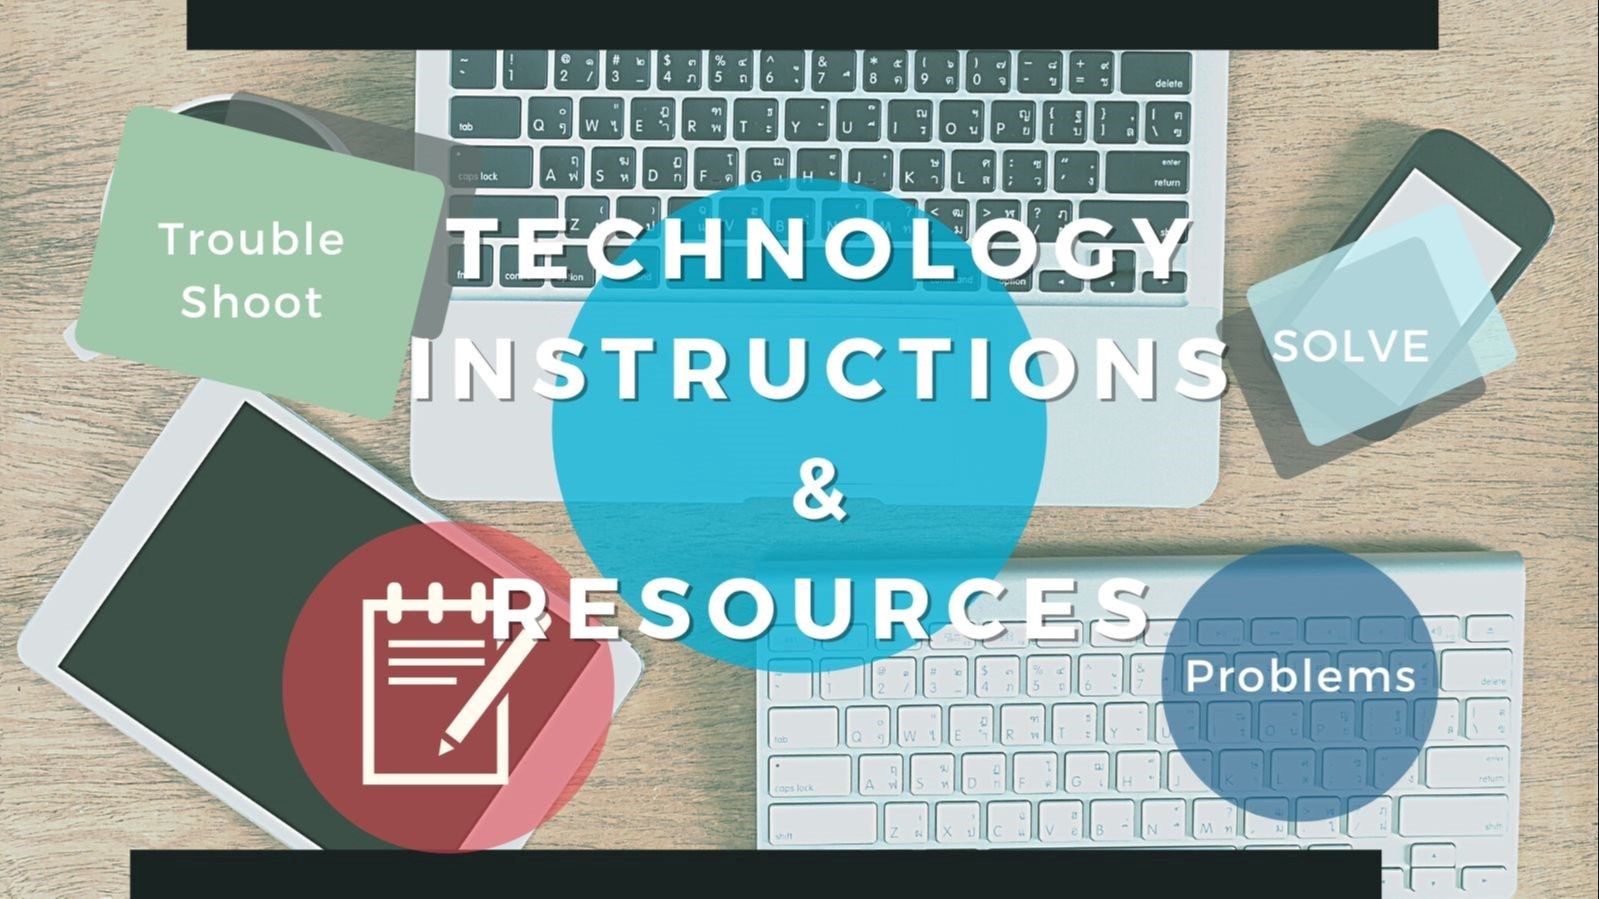 Technology Instructions and Resources